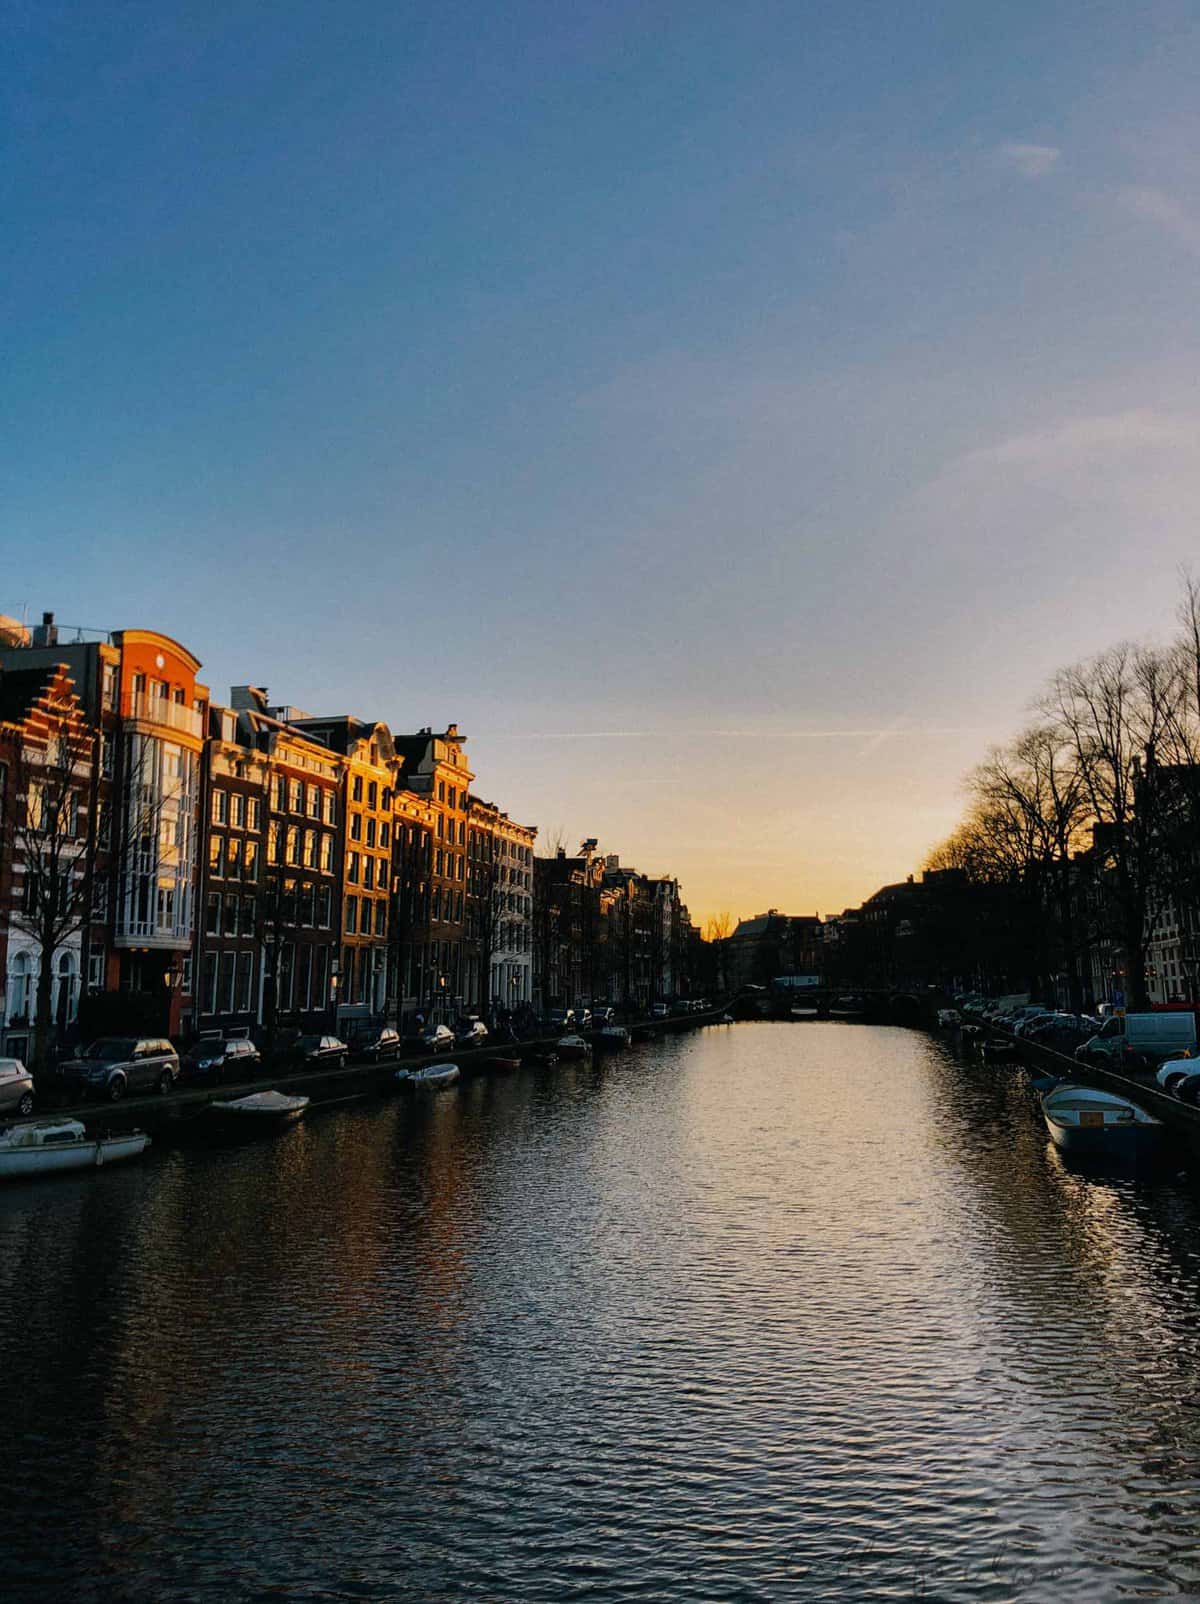 Amsterdam and its iconic row houses and canals!